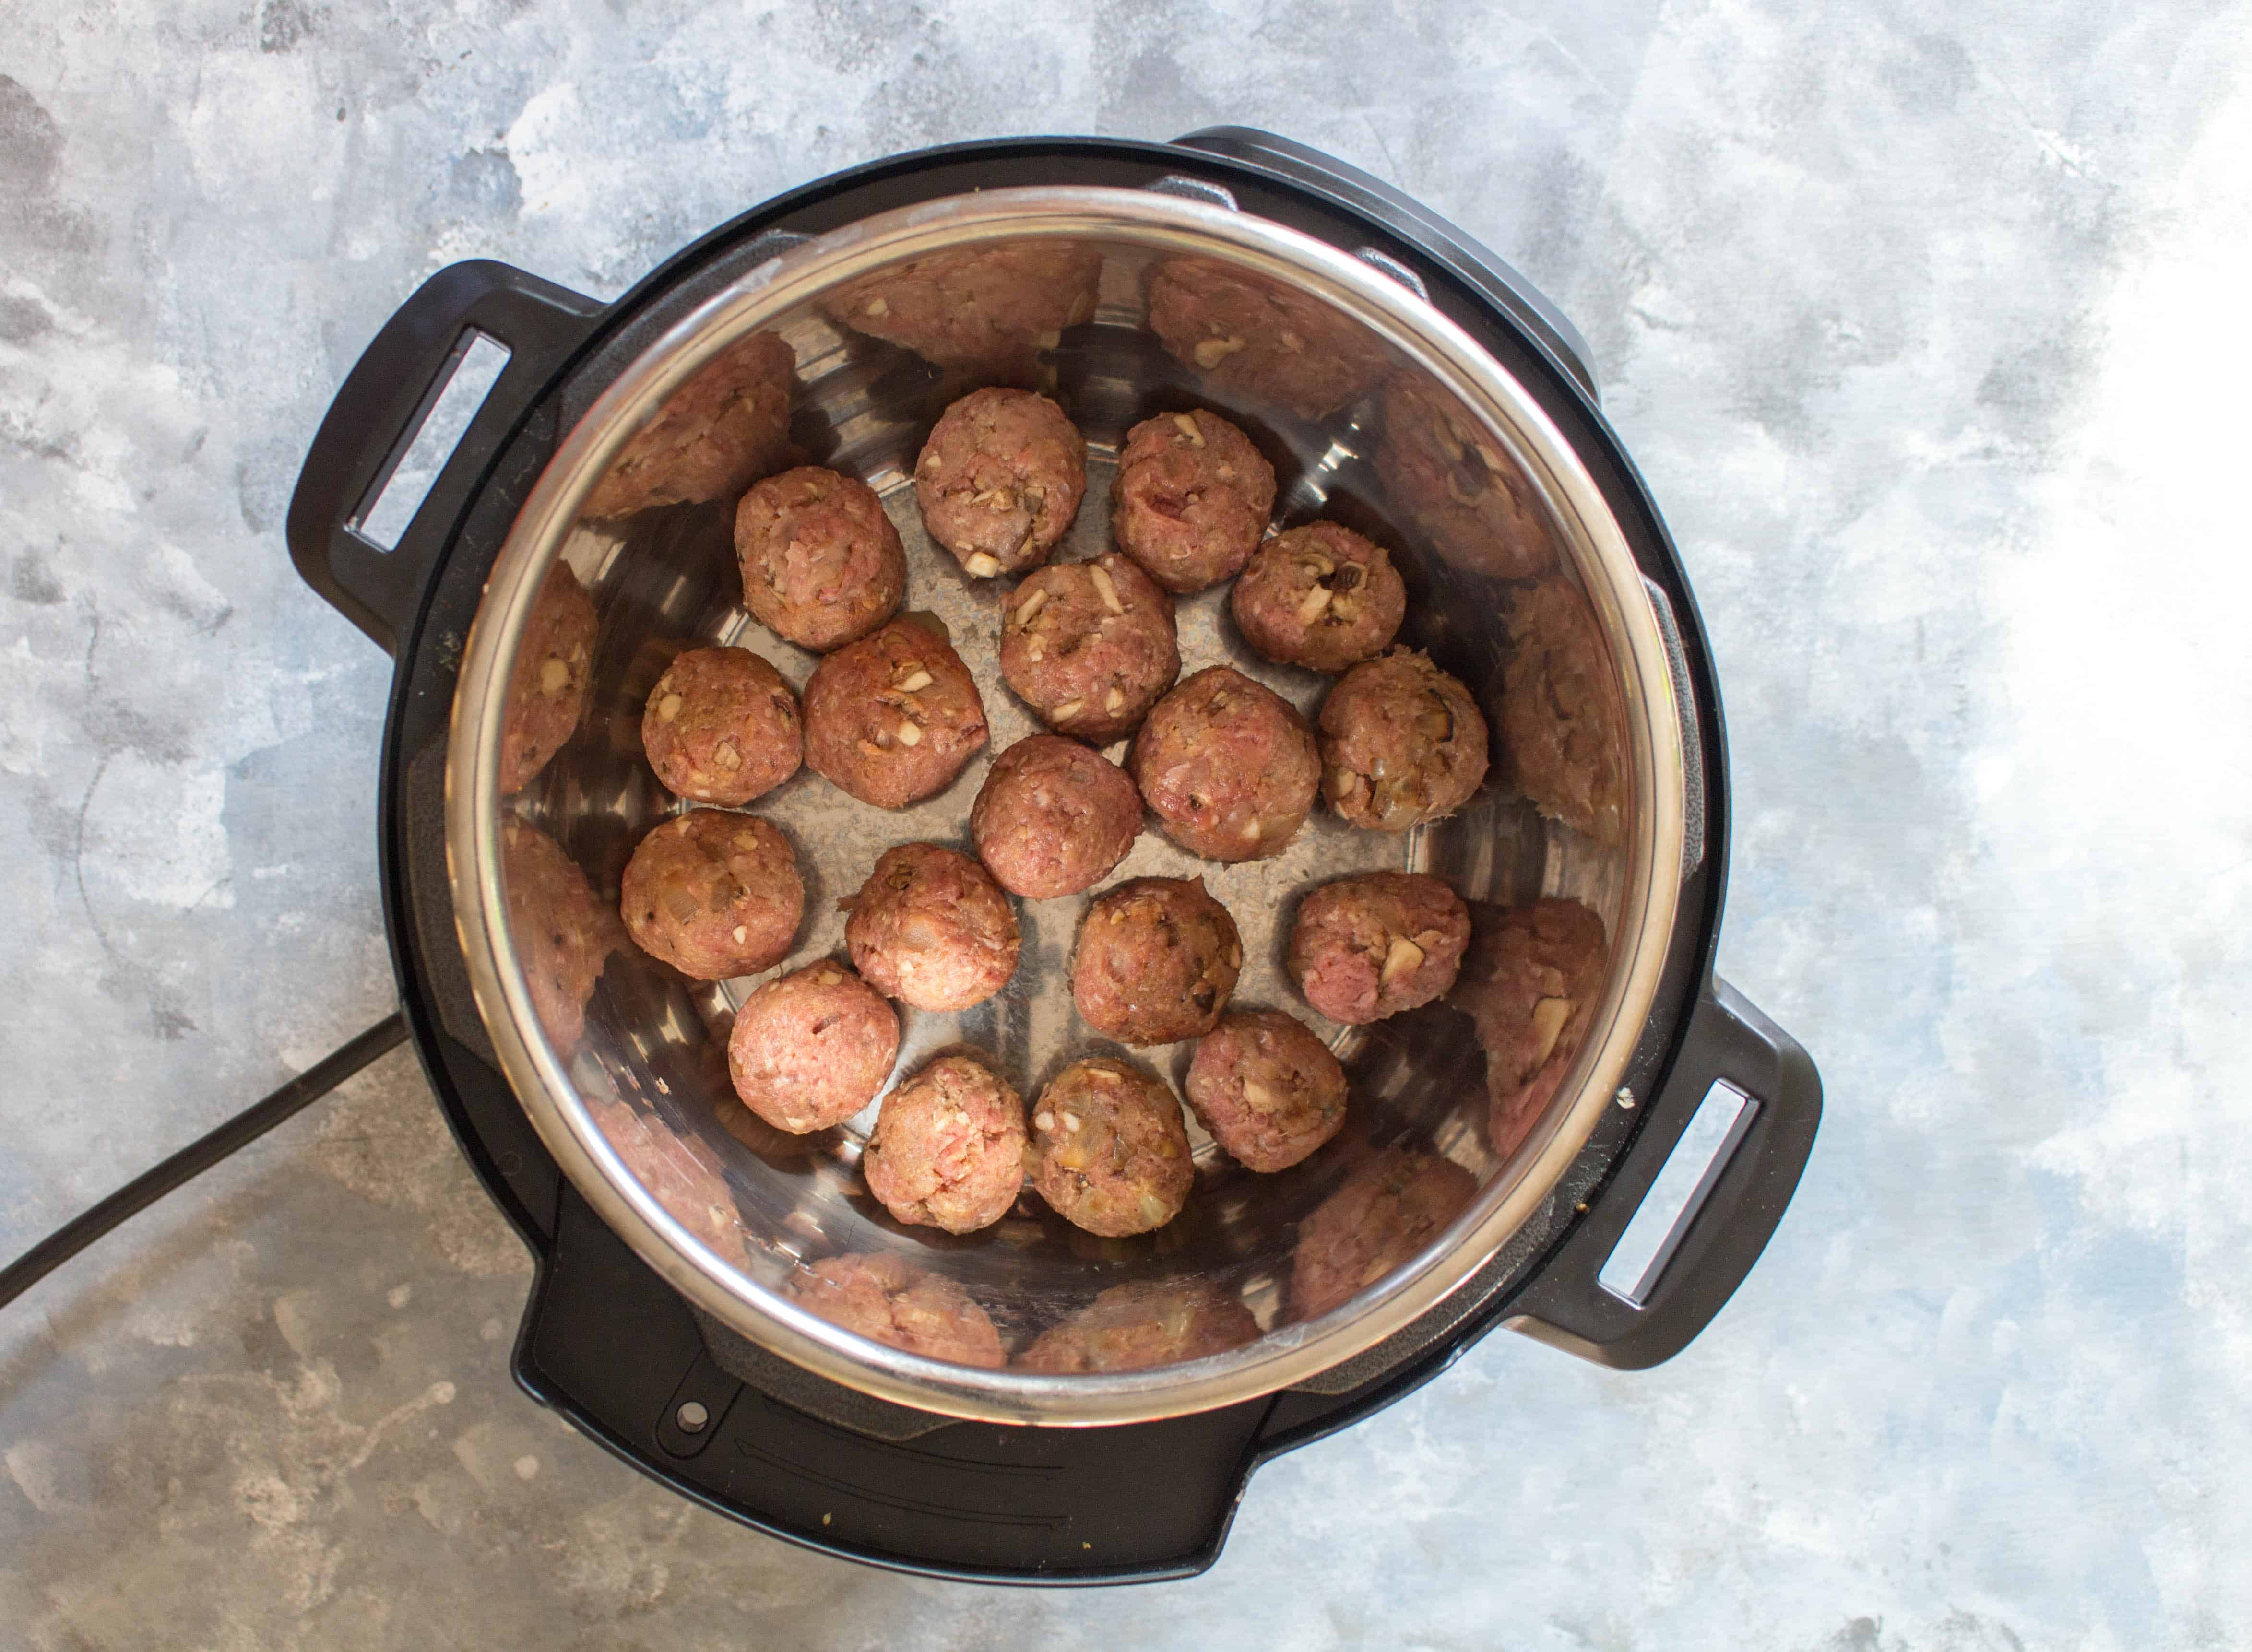 Instant Pot Salisbury Steak Styled Meatballs in the Instant Pot to be browned